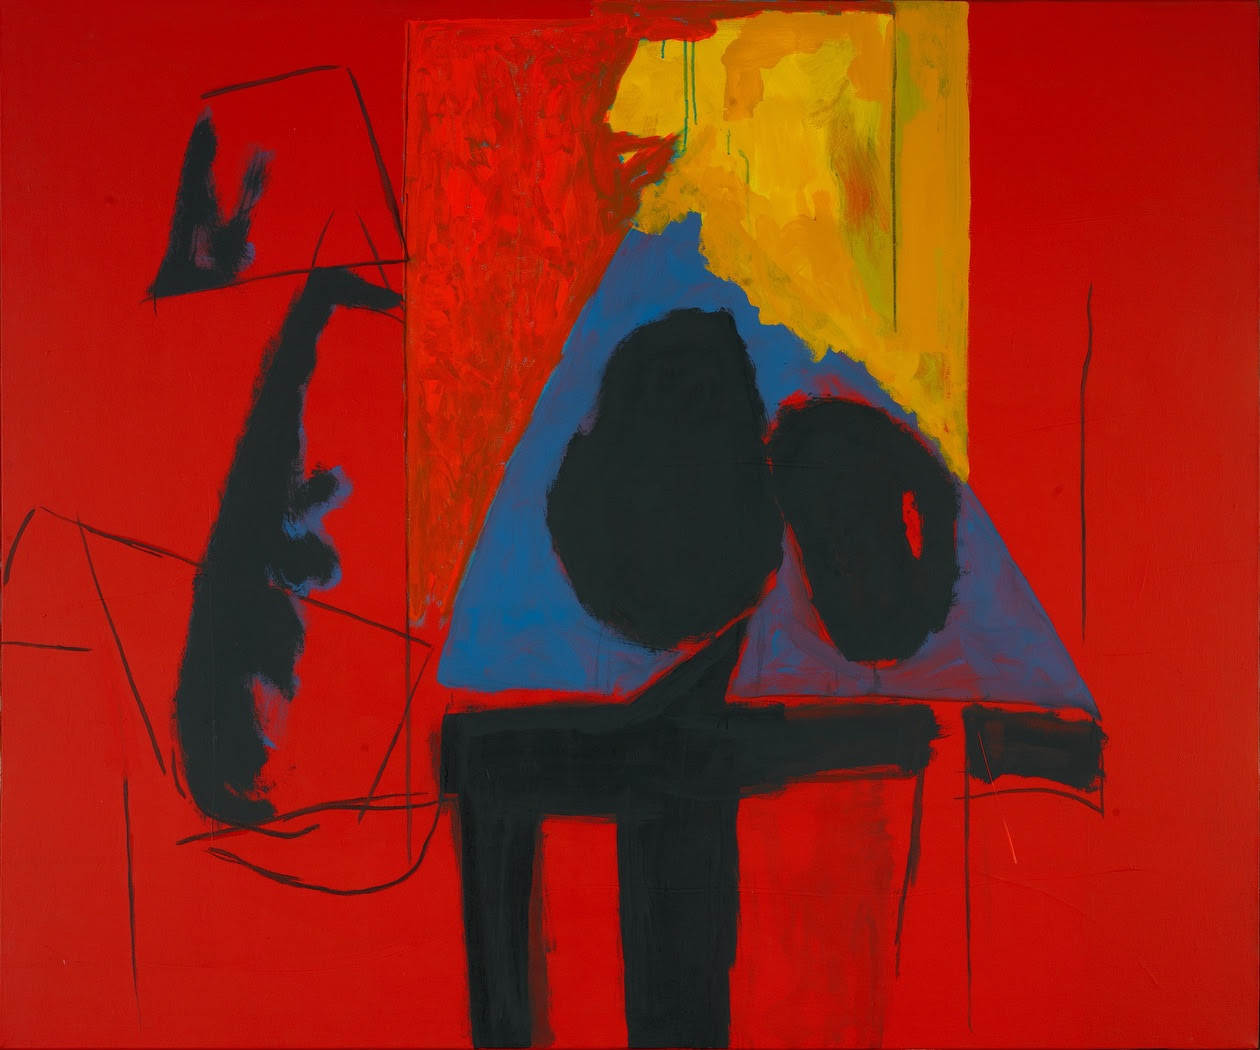 Robert Motherwell, The Studio (1987), Acrylic and charcoal on canvas, 152.4 x 182.9 cms (60 x 72 ins)